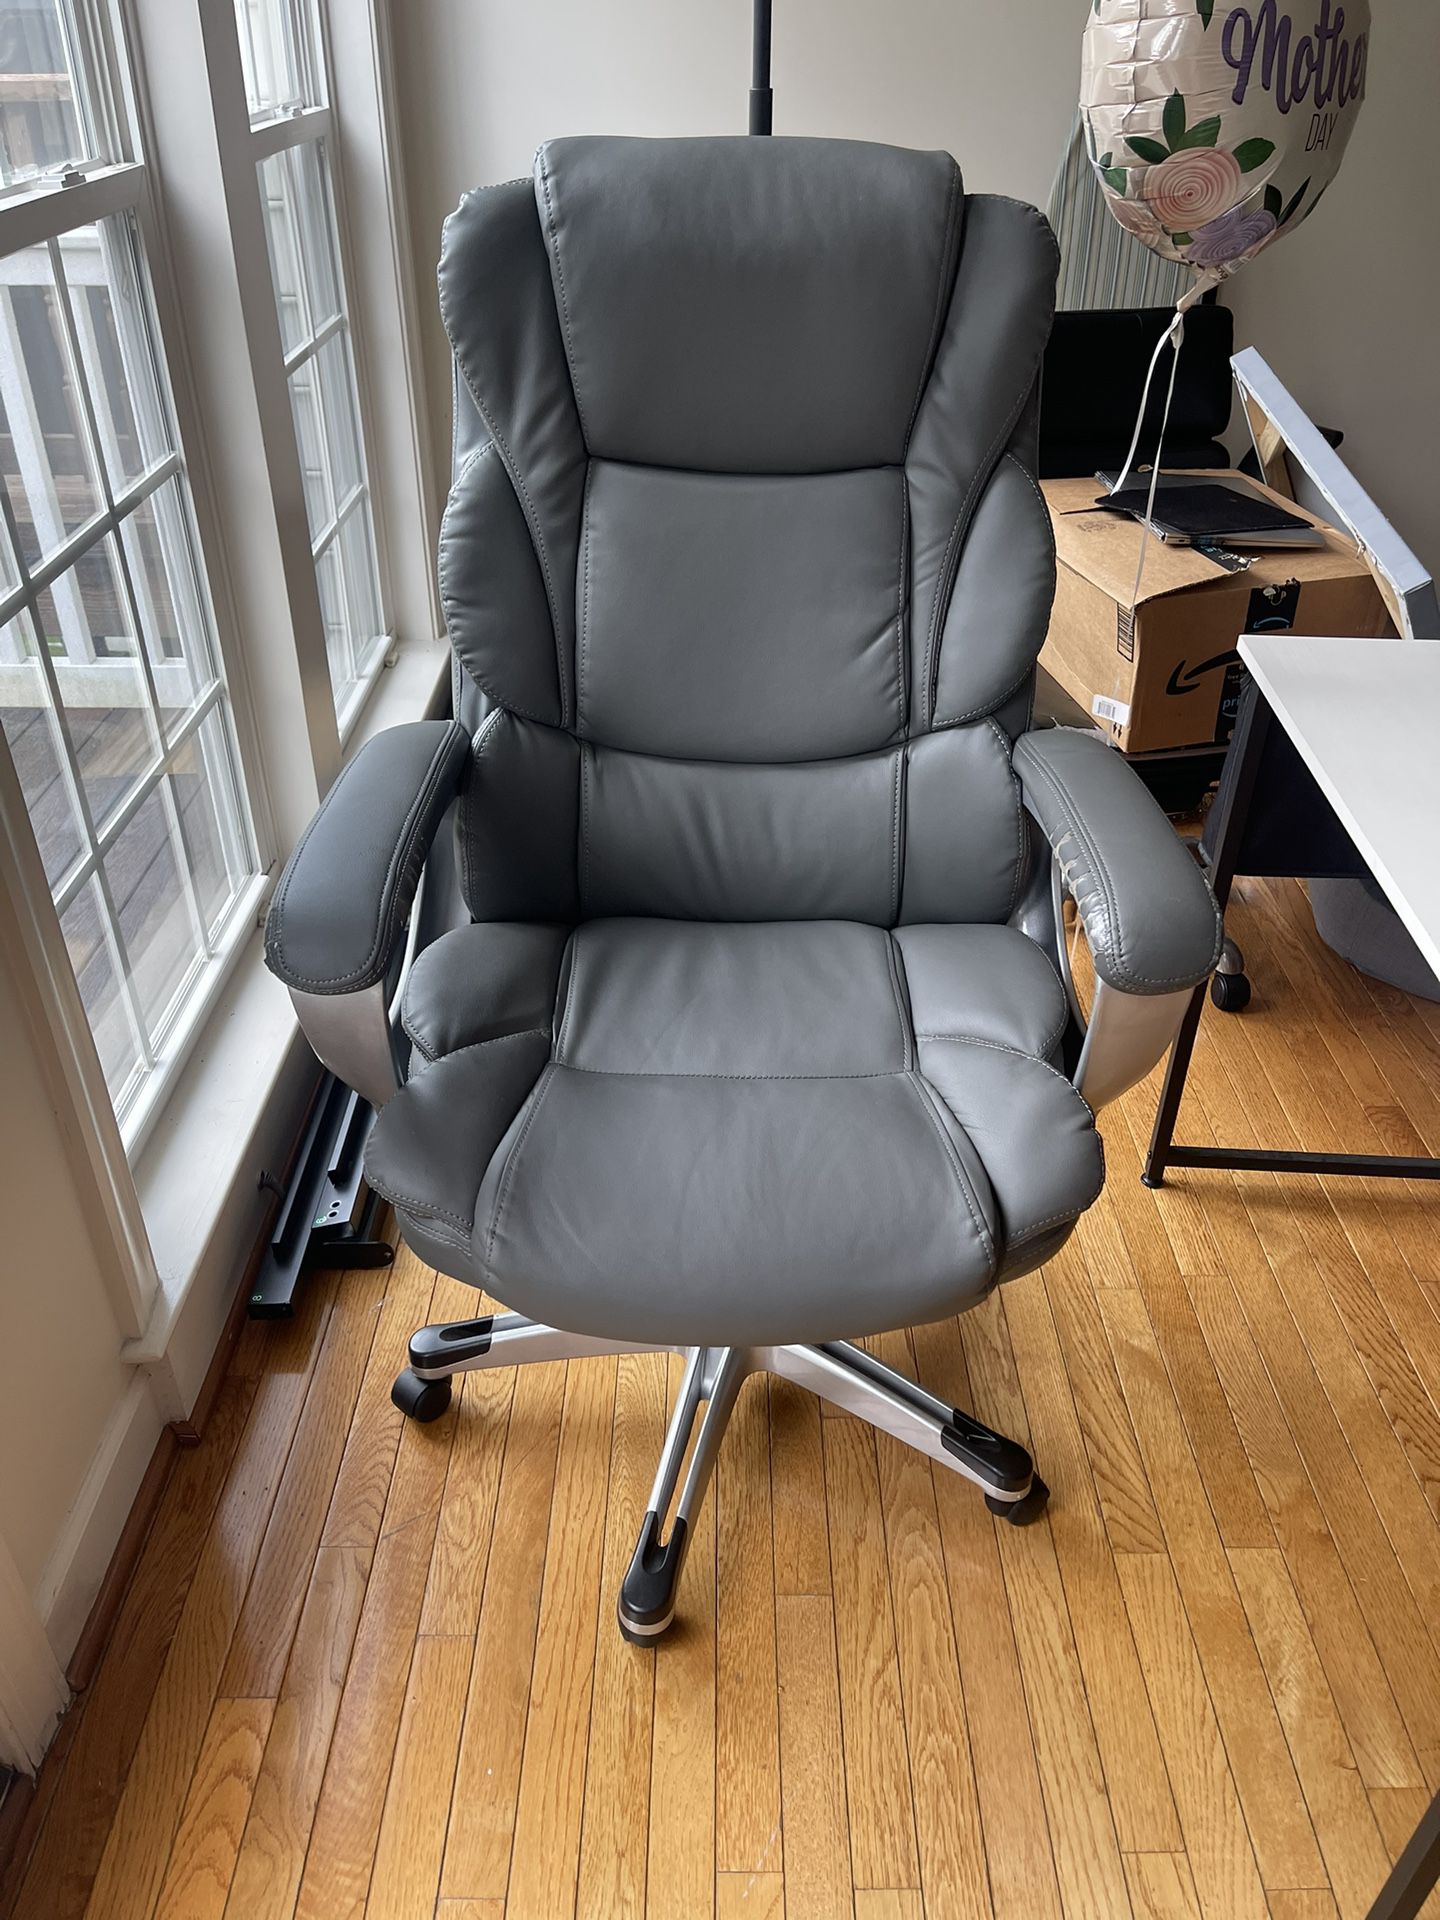 Great gaming chair/office chair 